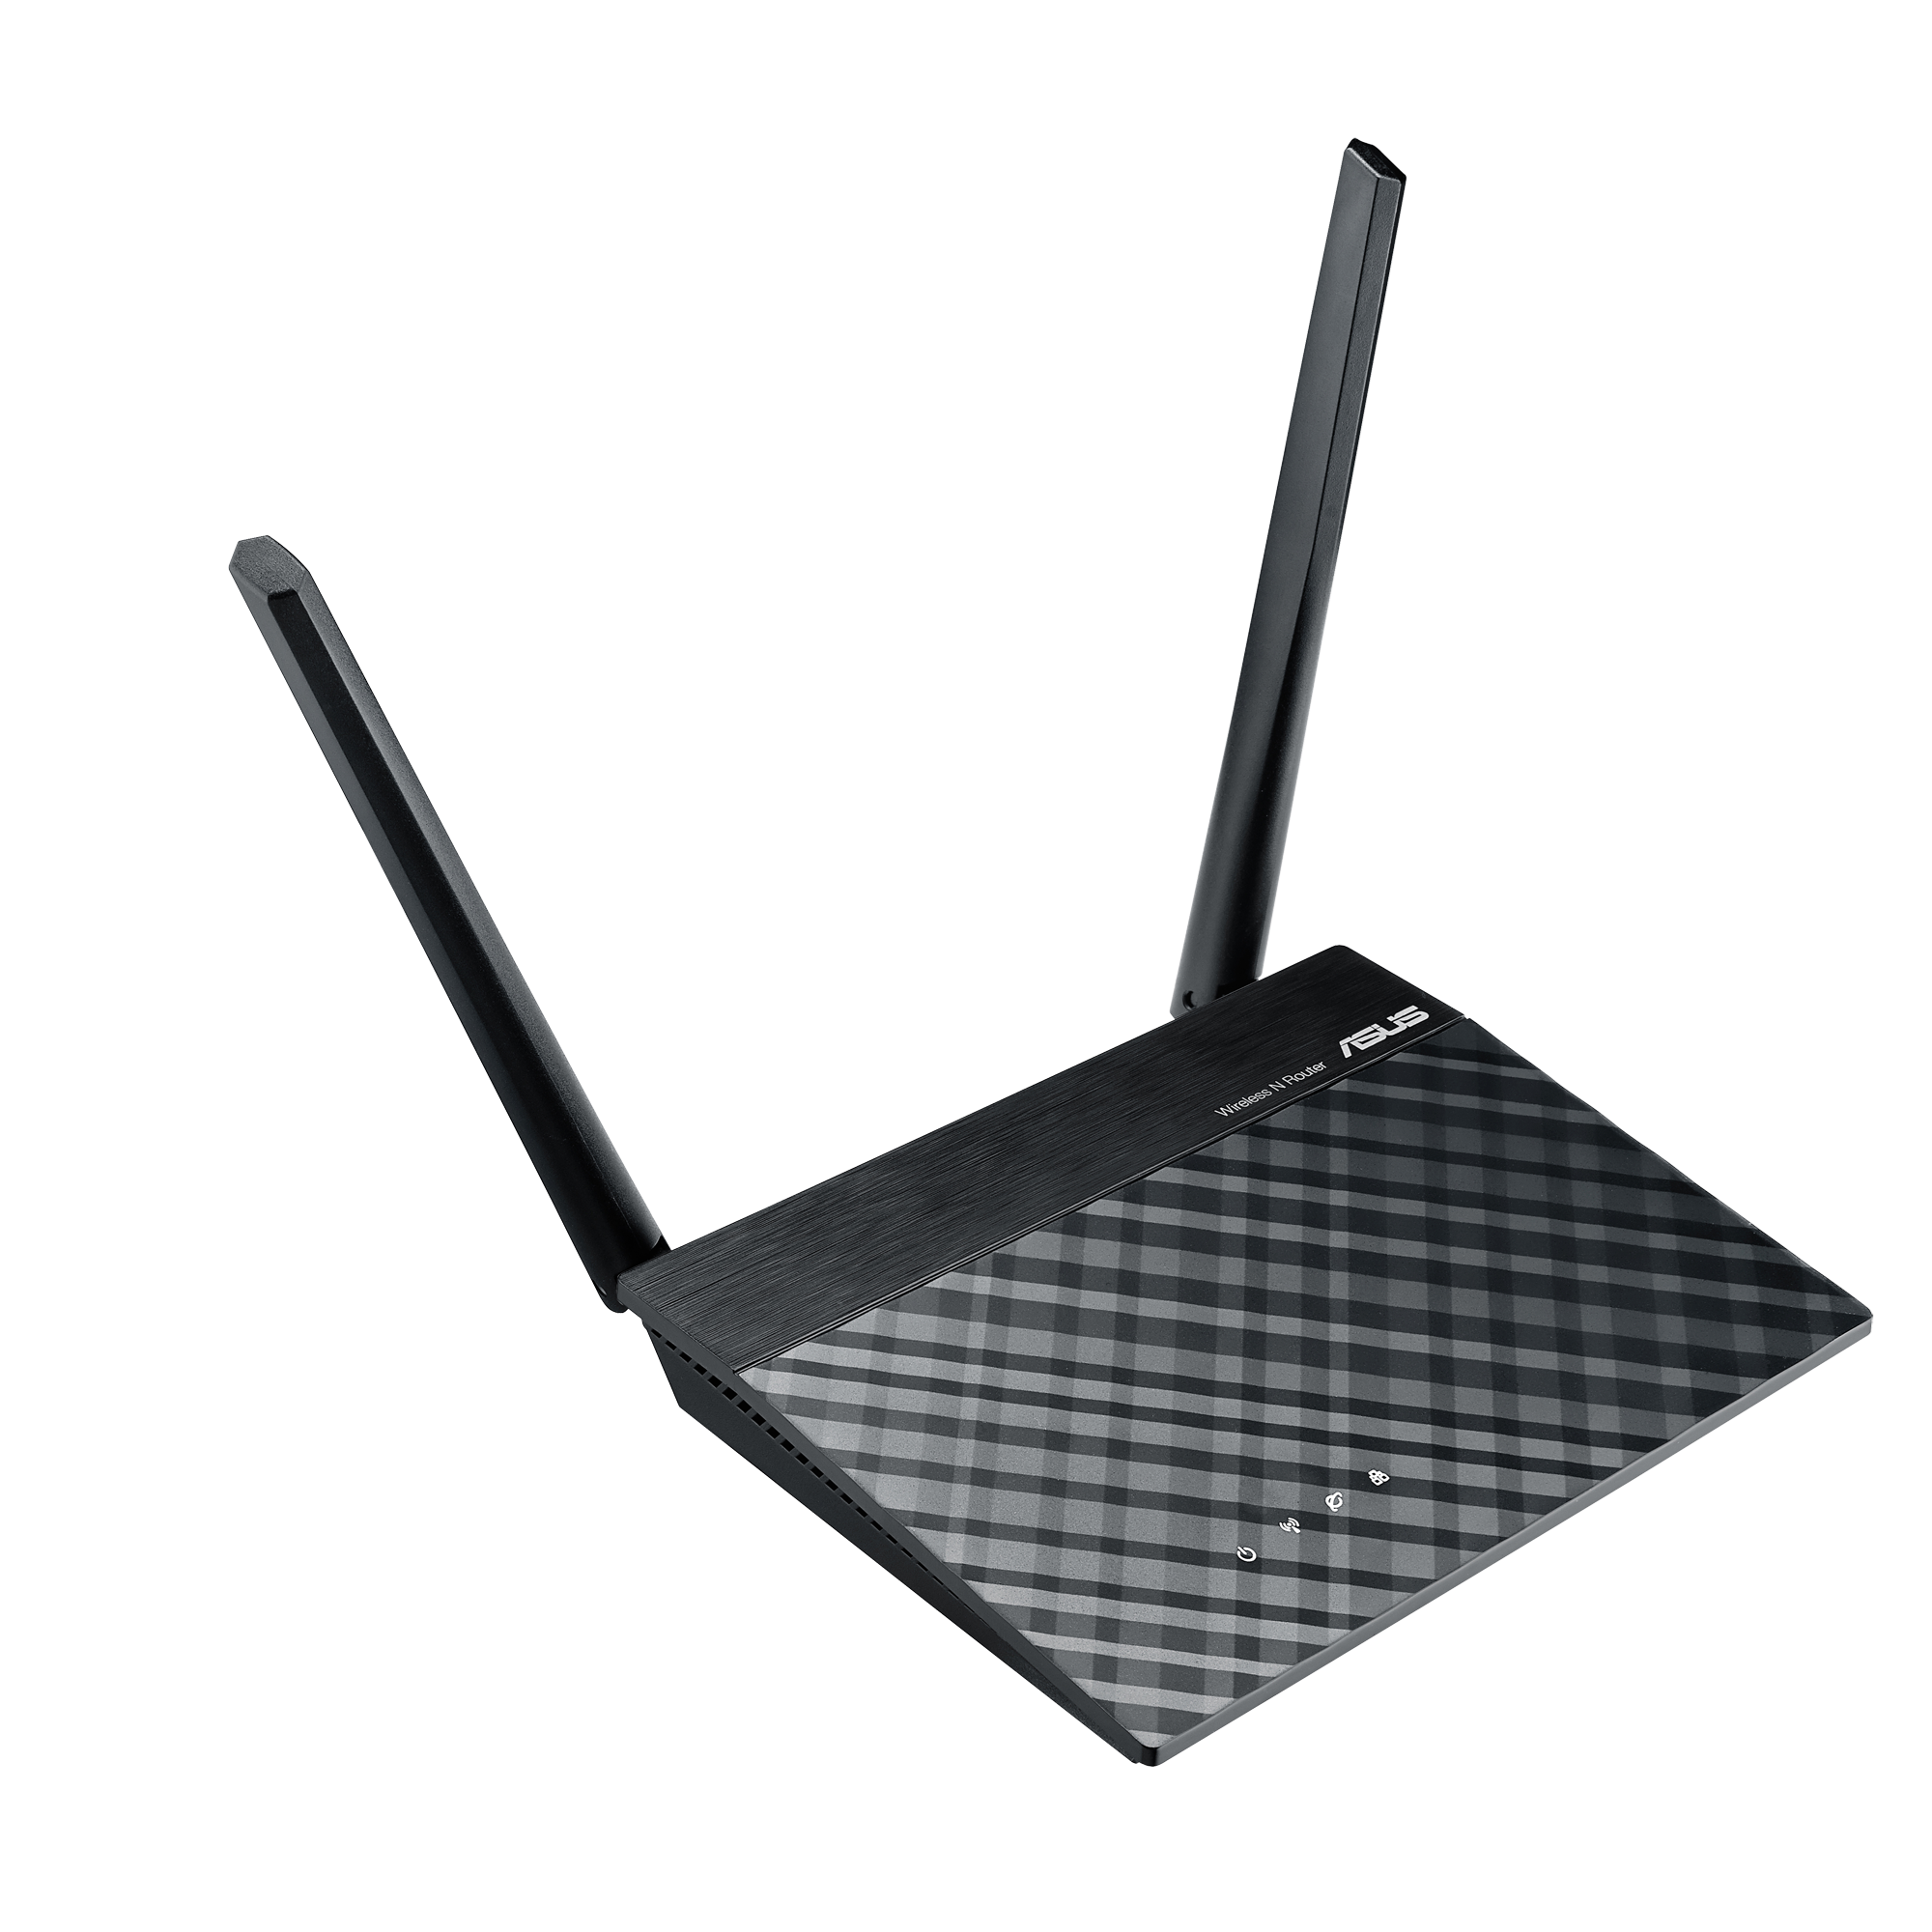 Wireless Router] How to set up IPTV on ASUS router?